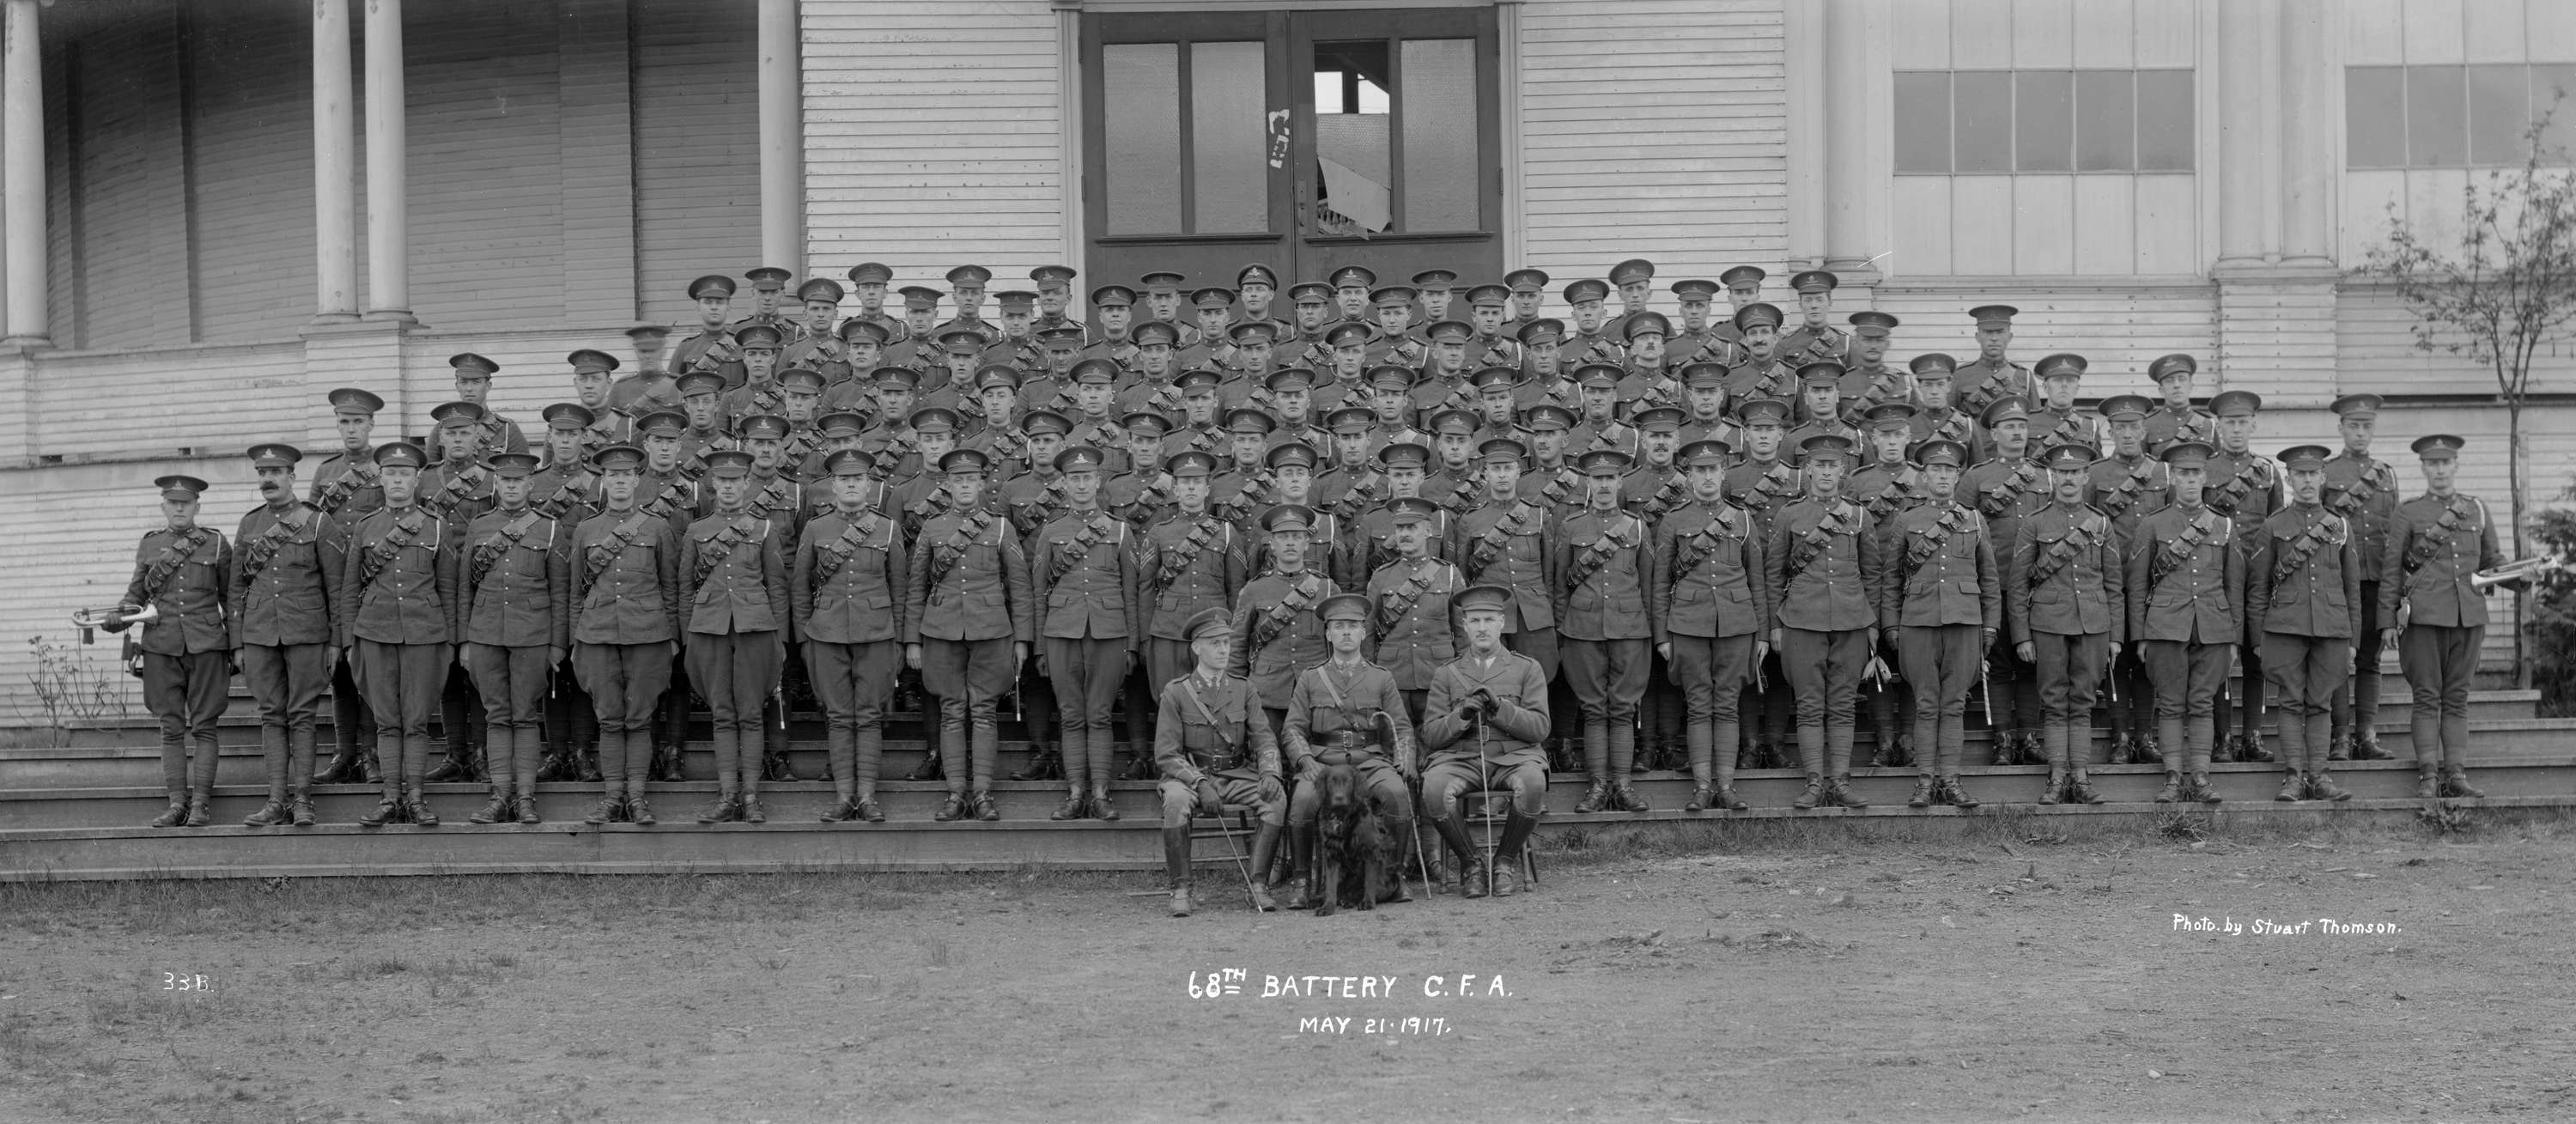 68th Battery C.F.A. May 21 1917.jpg